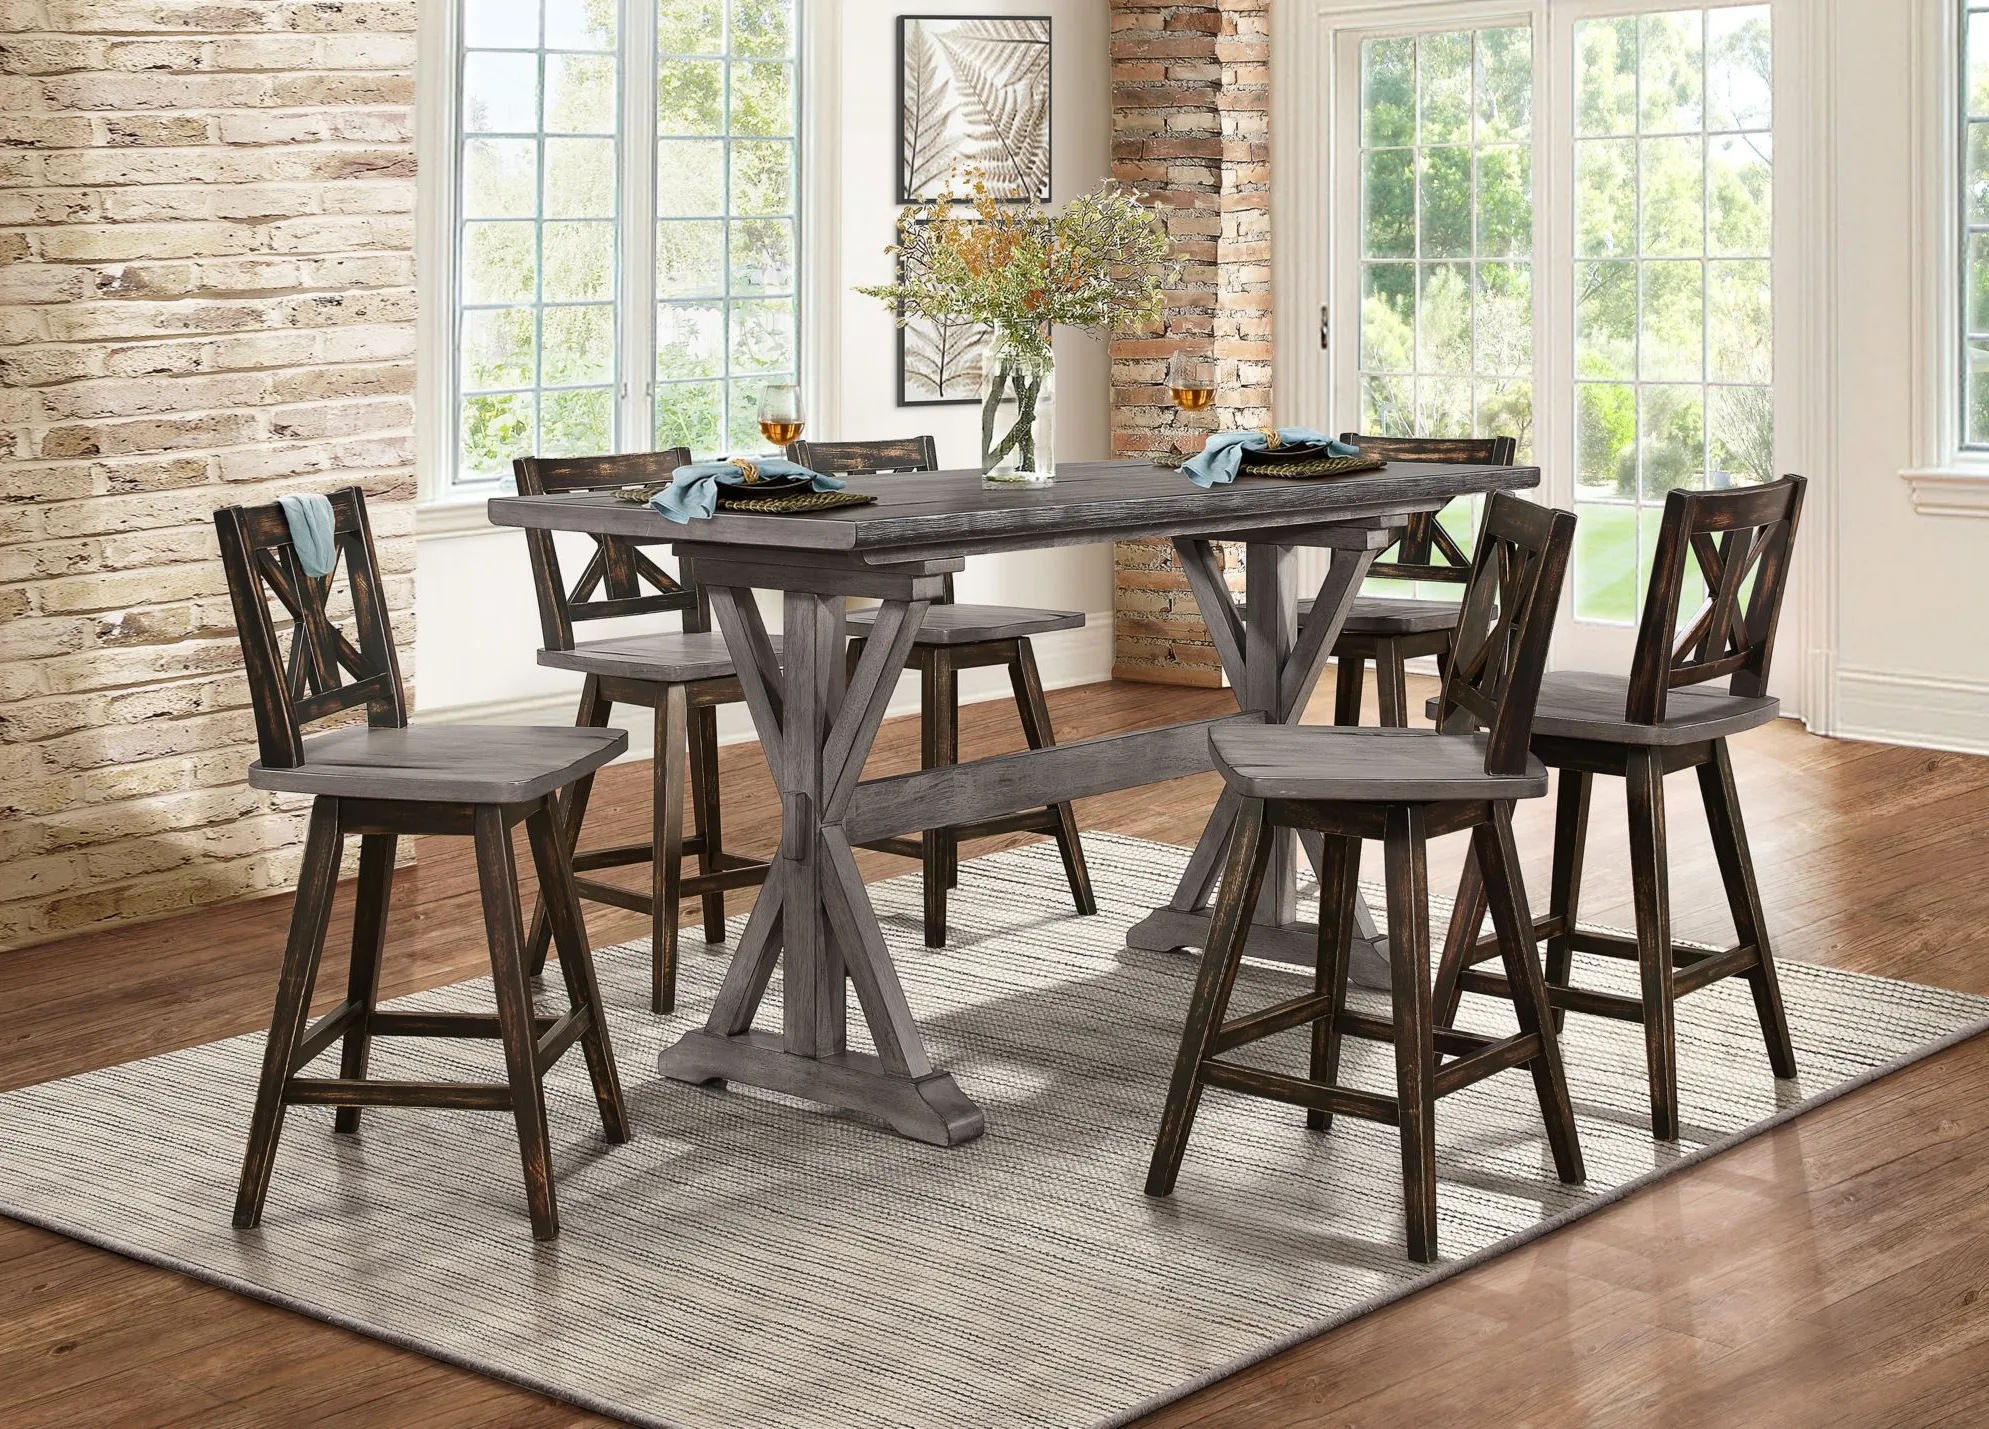 Trouvaille 7-pc. Counter Height Dining Set in Gray / Black by Homelegance